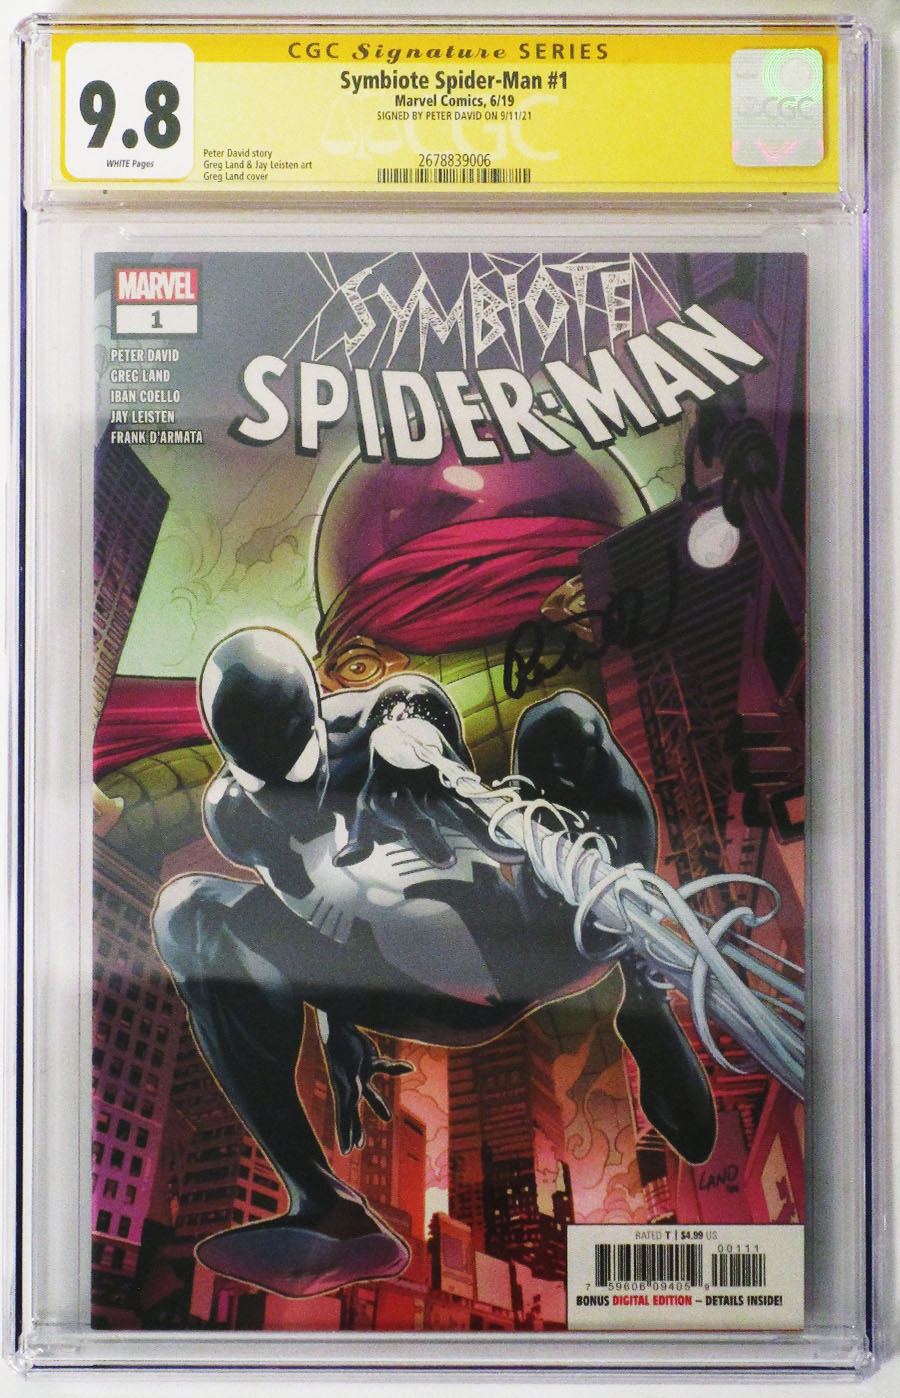 Symbiote Spider-Man #1 Cover Q 1st Ptg Regular Greg Land Cover Signed By Peter David CGC 9.8